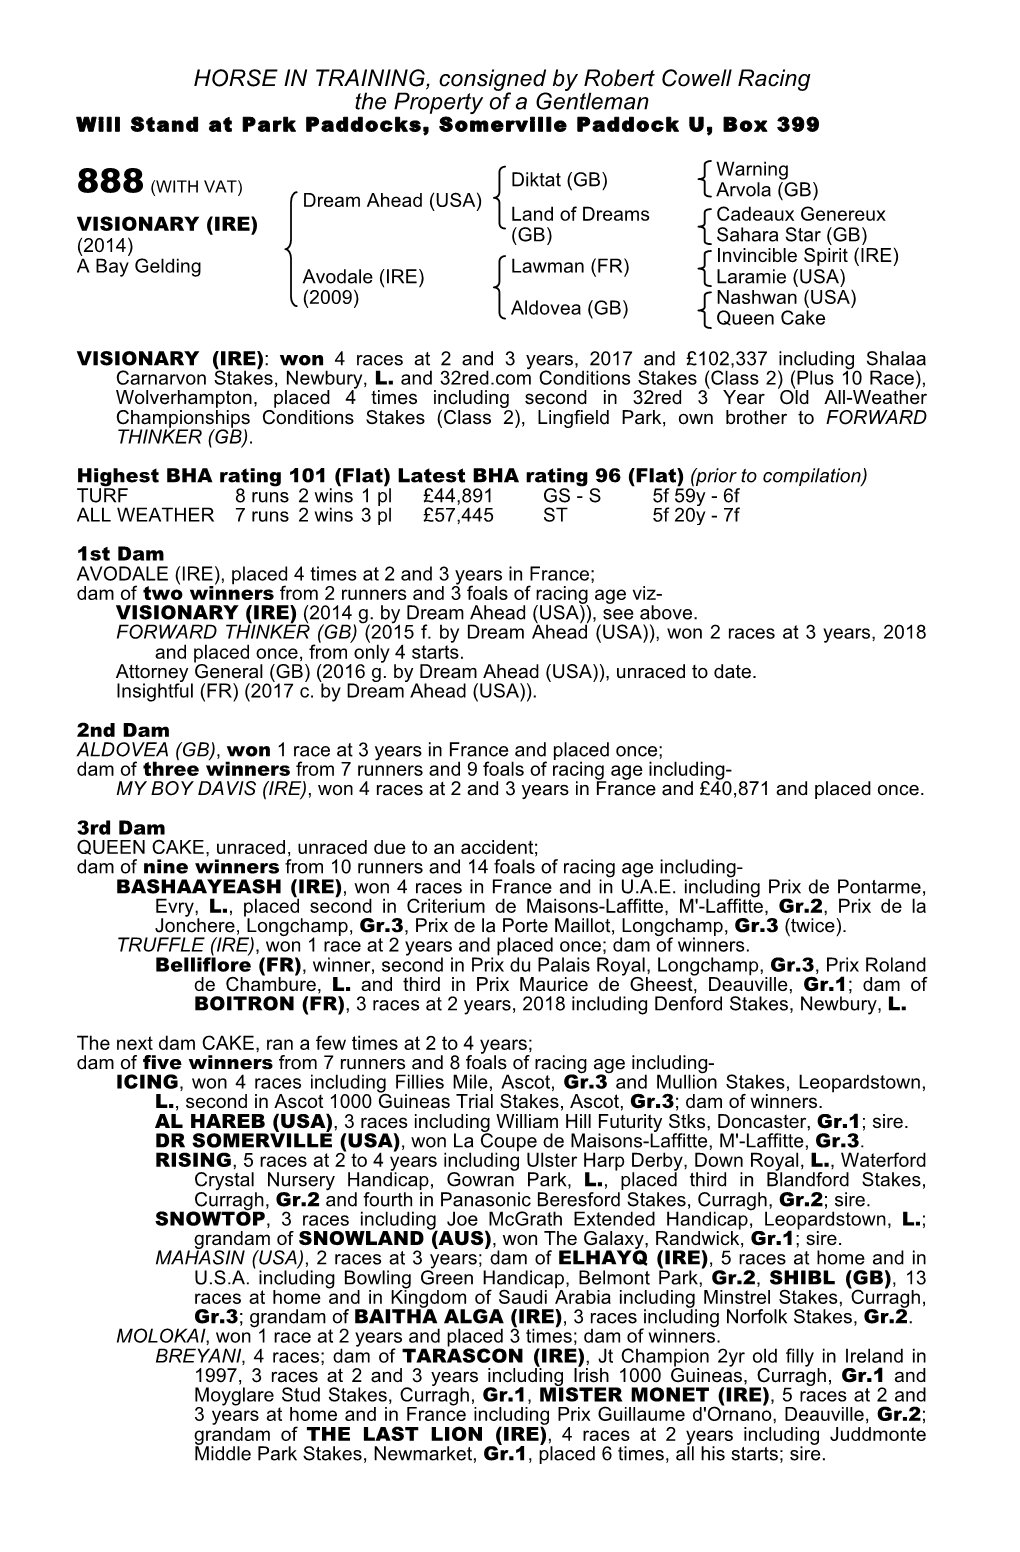 HORSE in TRAINING, Consigned by Robert Cowell Racing the Property of a Gentleman Will Stand at Park Paddocks, Somerville Paddock U, Box 399